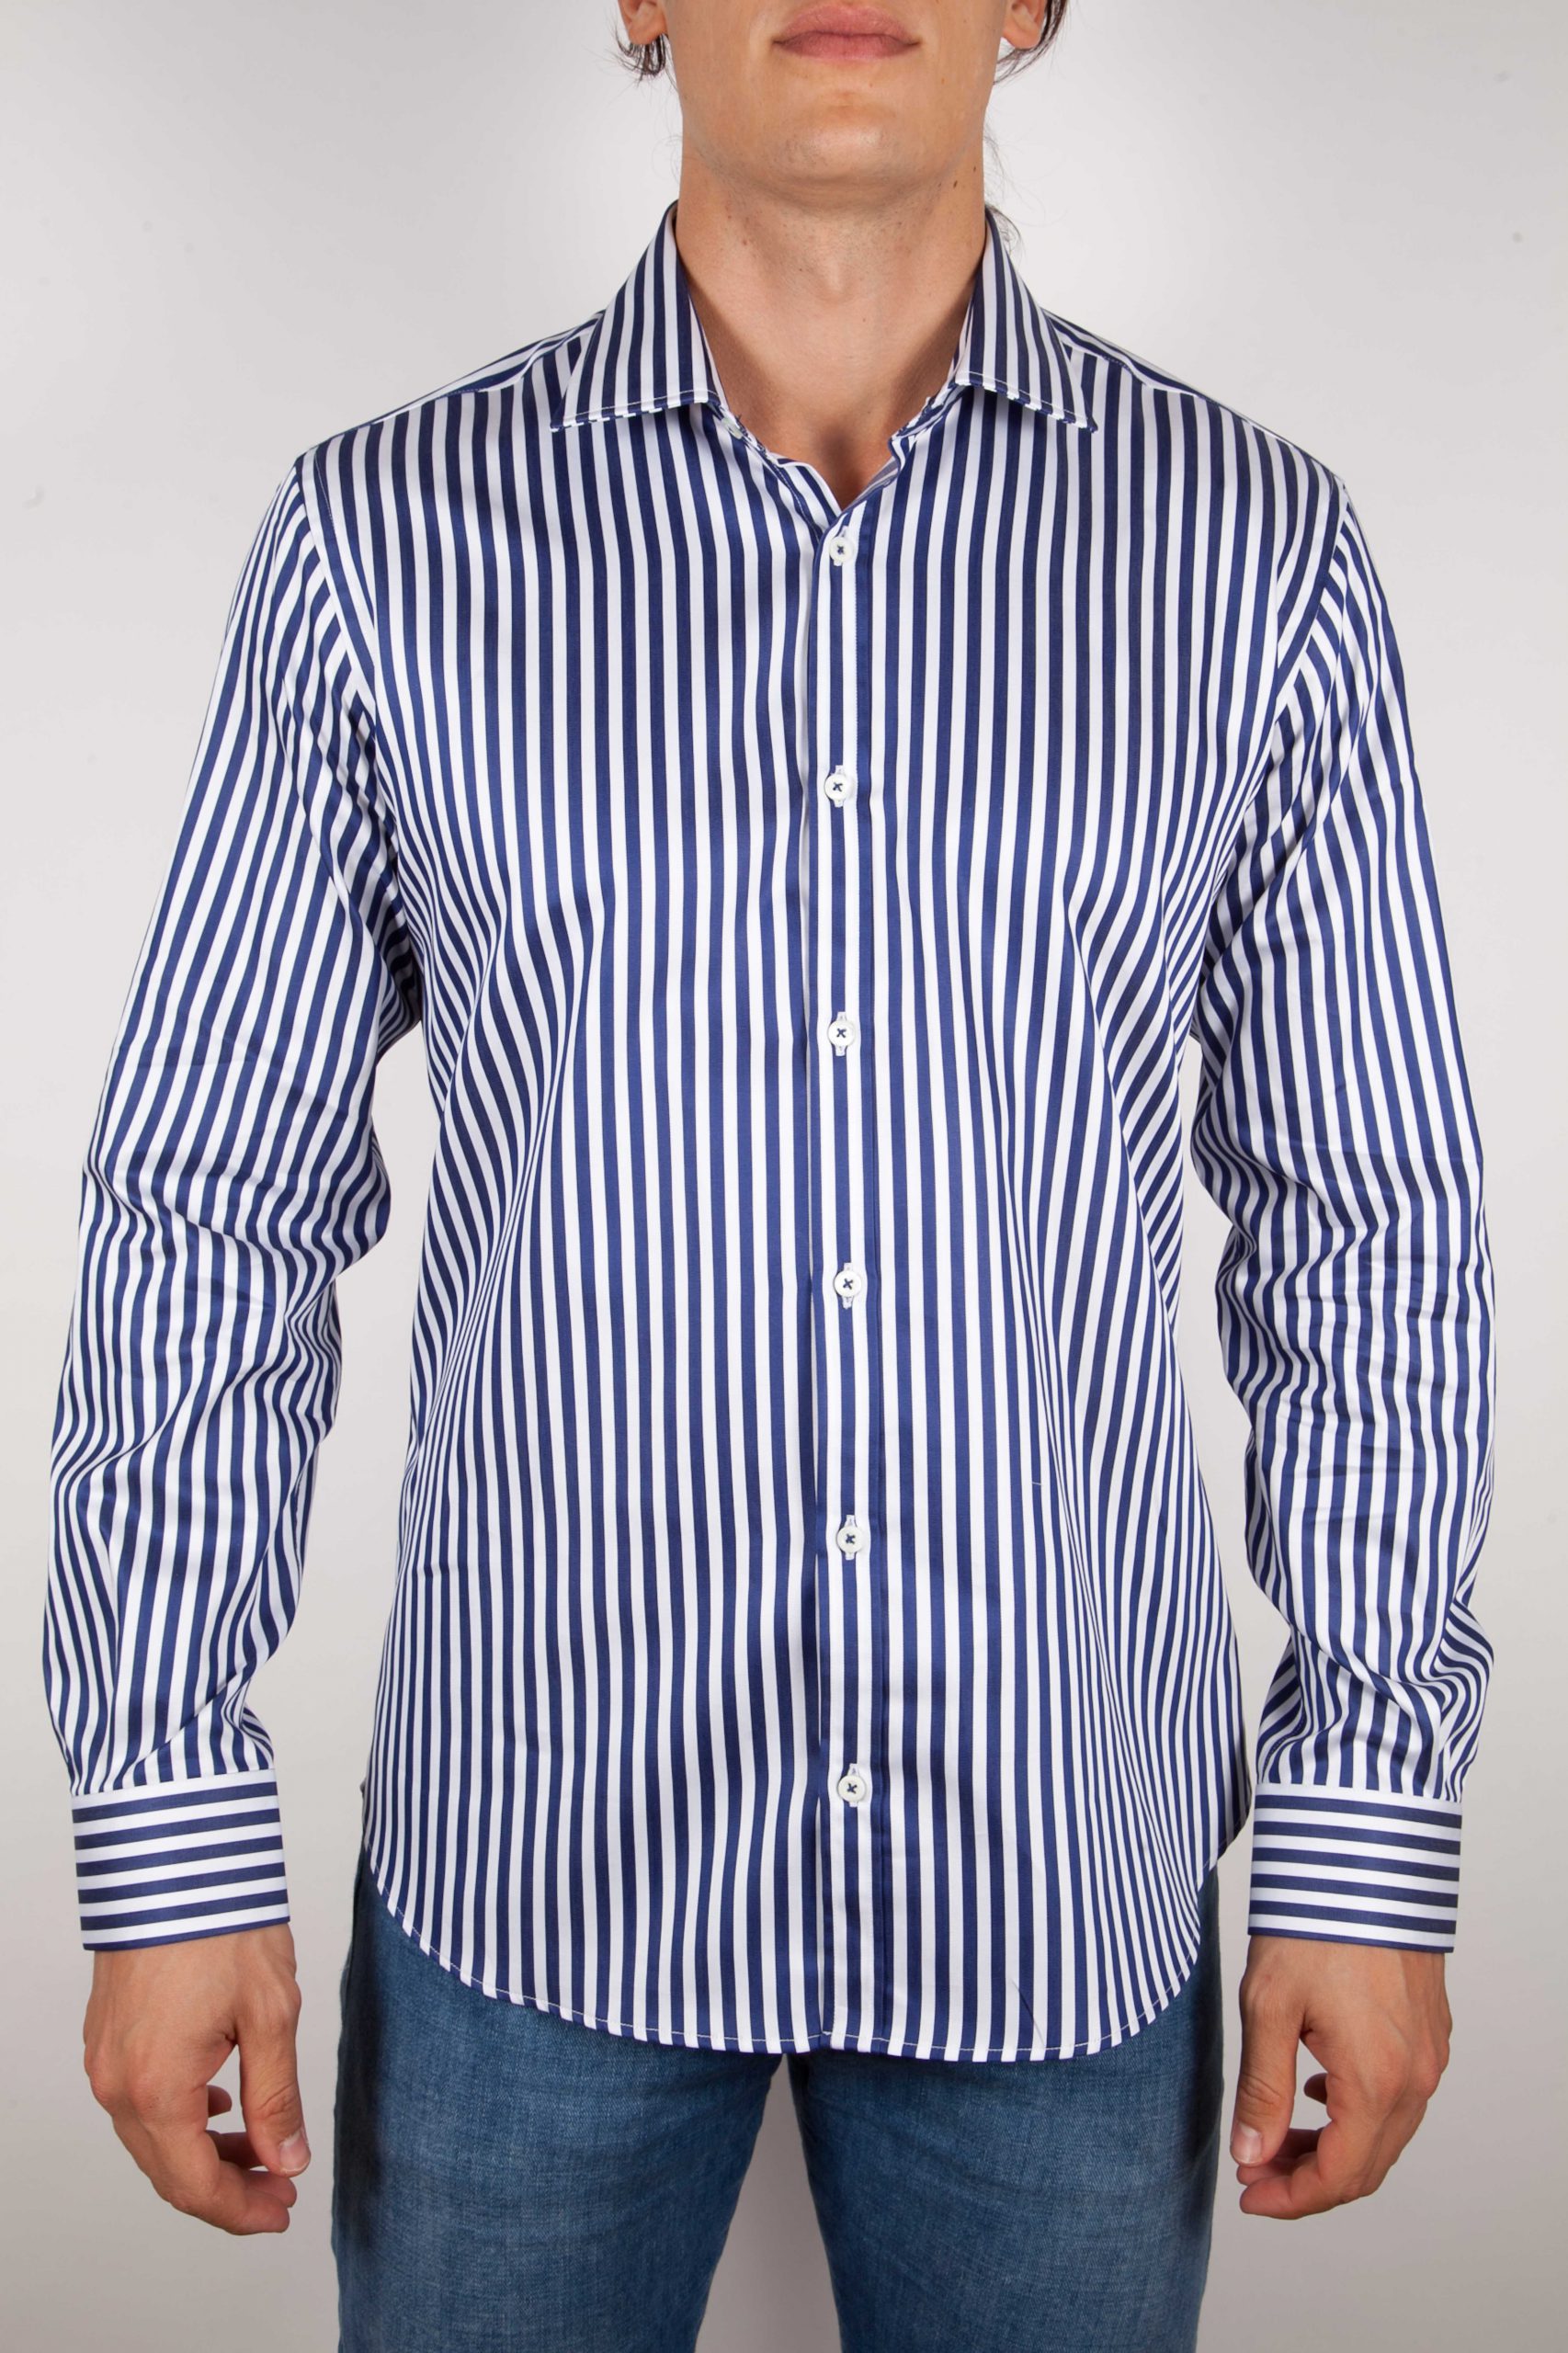 Shirt with blue and white lines - Poggianti camicie